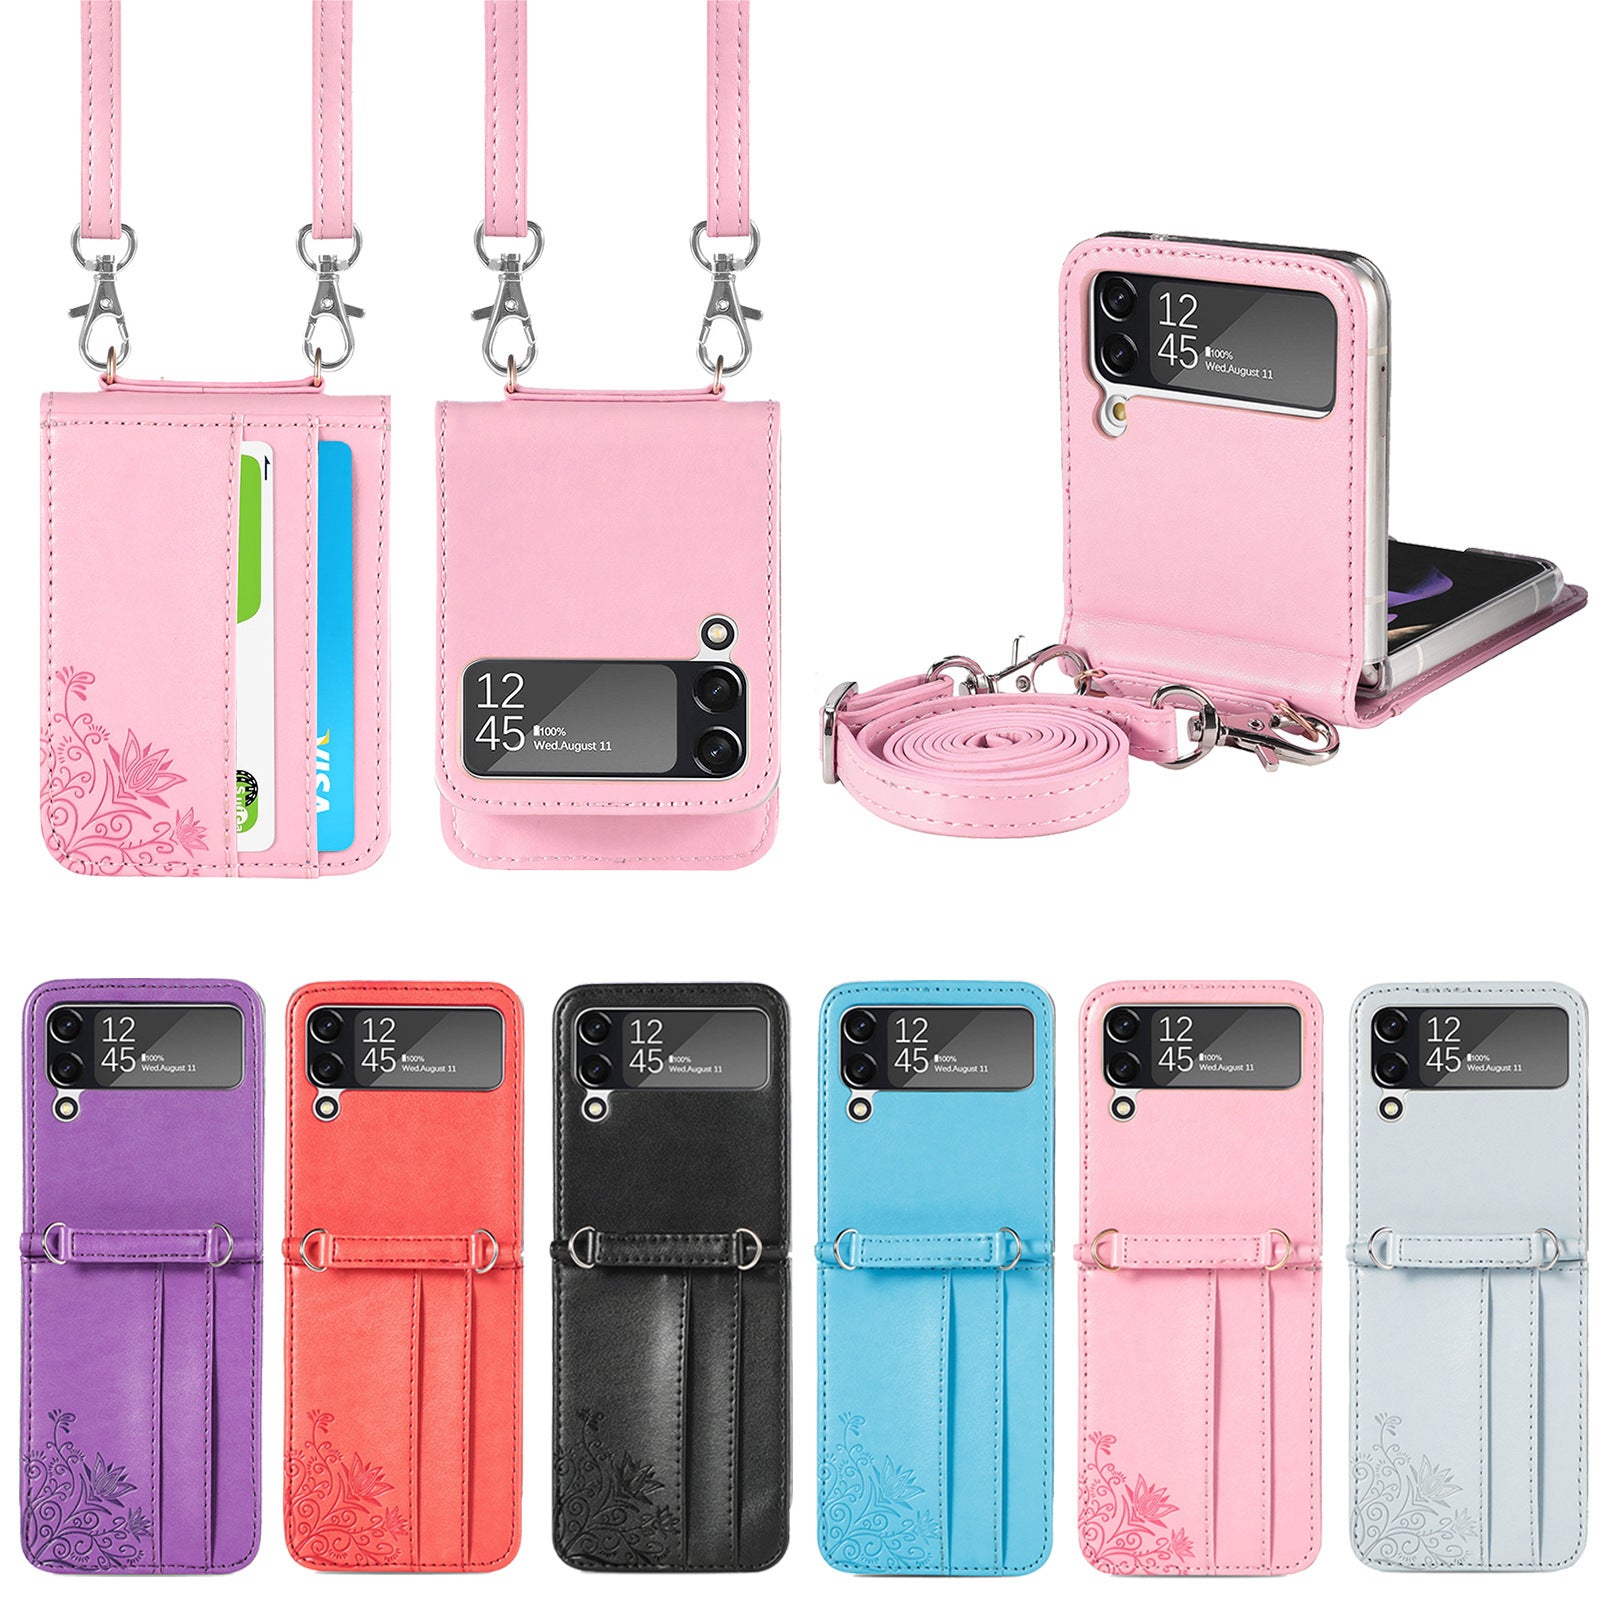 Samsung Galaxy Z Flip 3 protective leather case